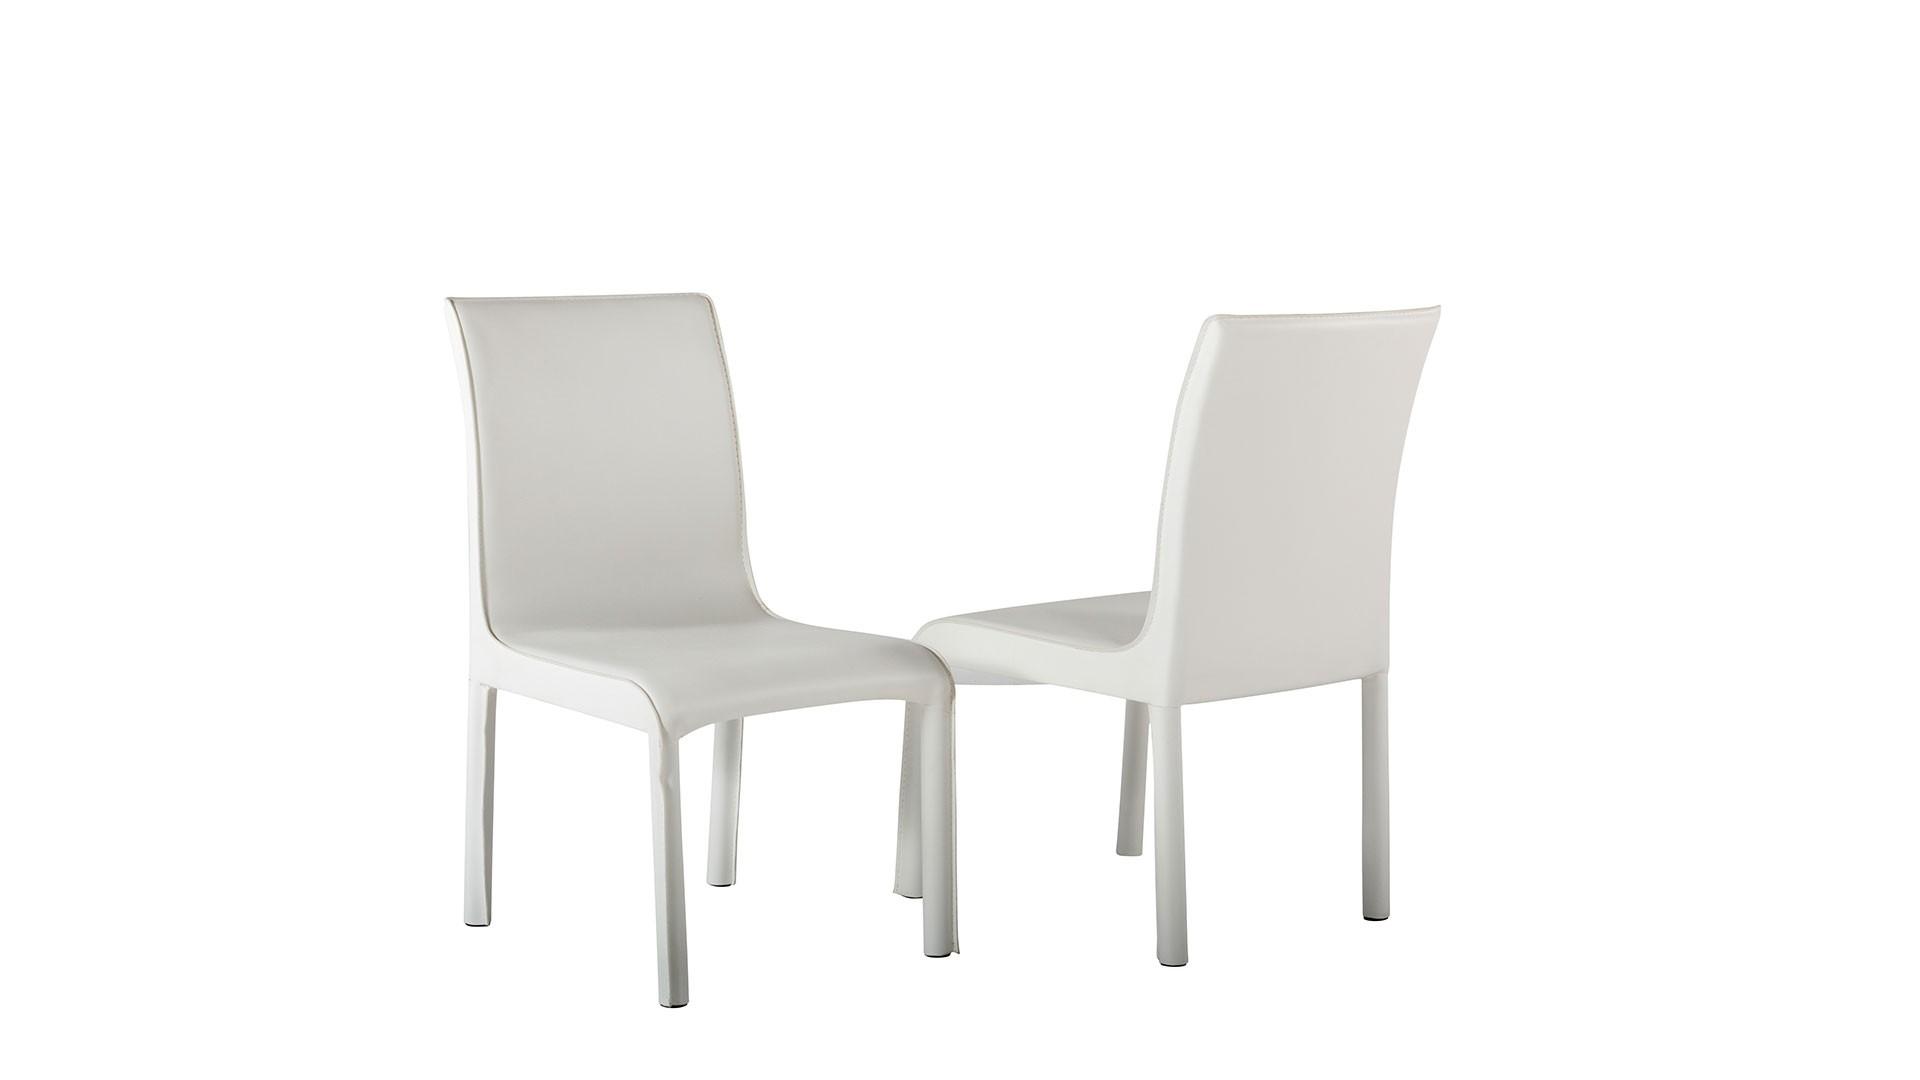 

    
At Home USA Swansea White Dining Chair Set 6Pcs Contemporary
